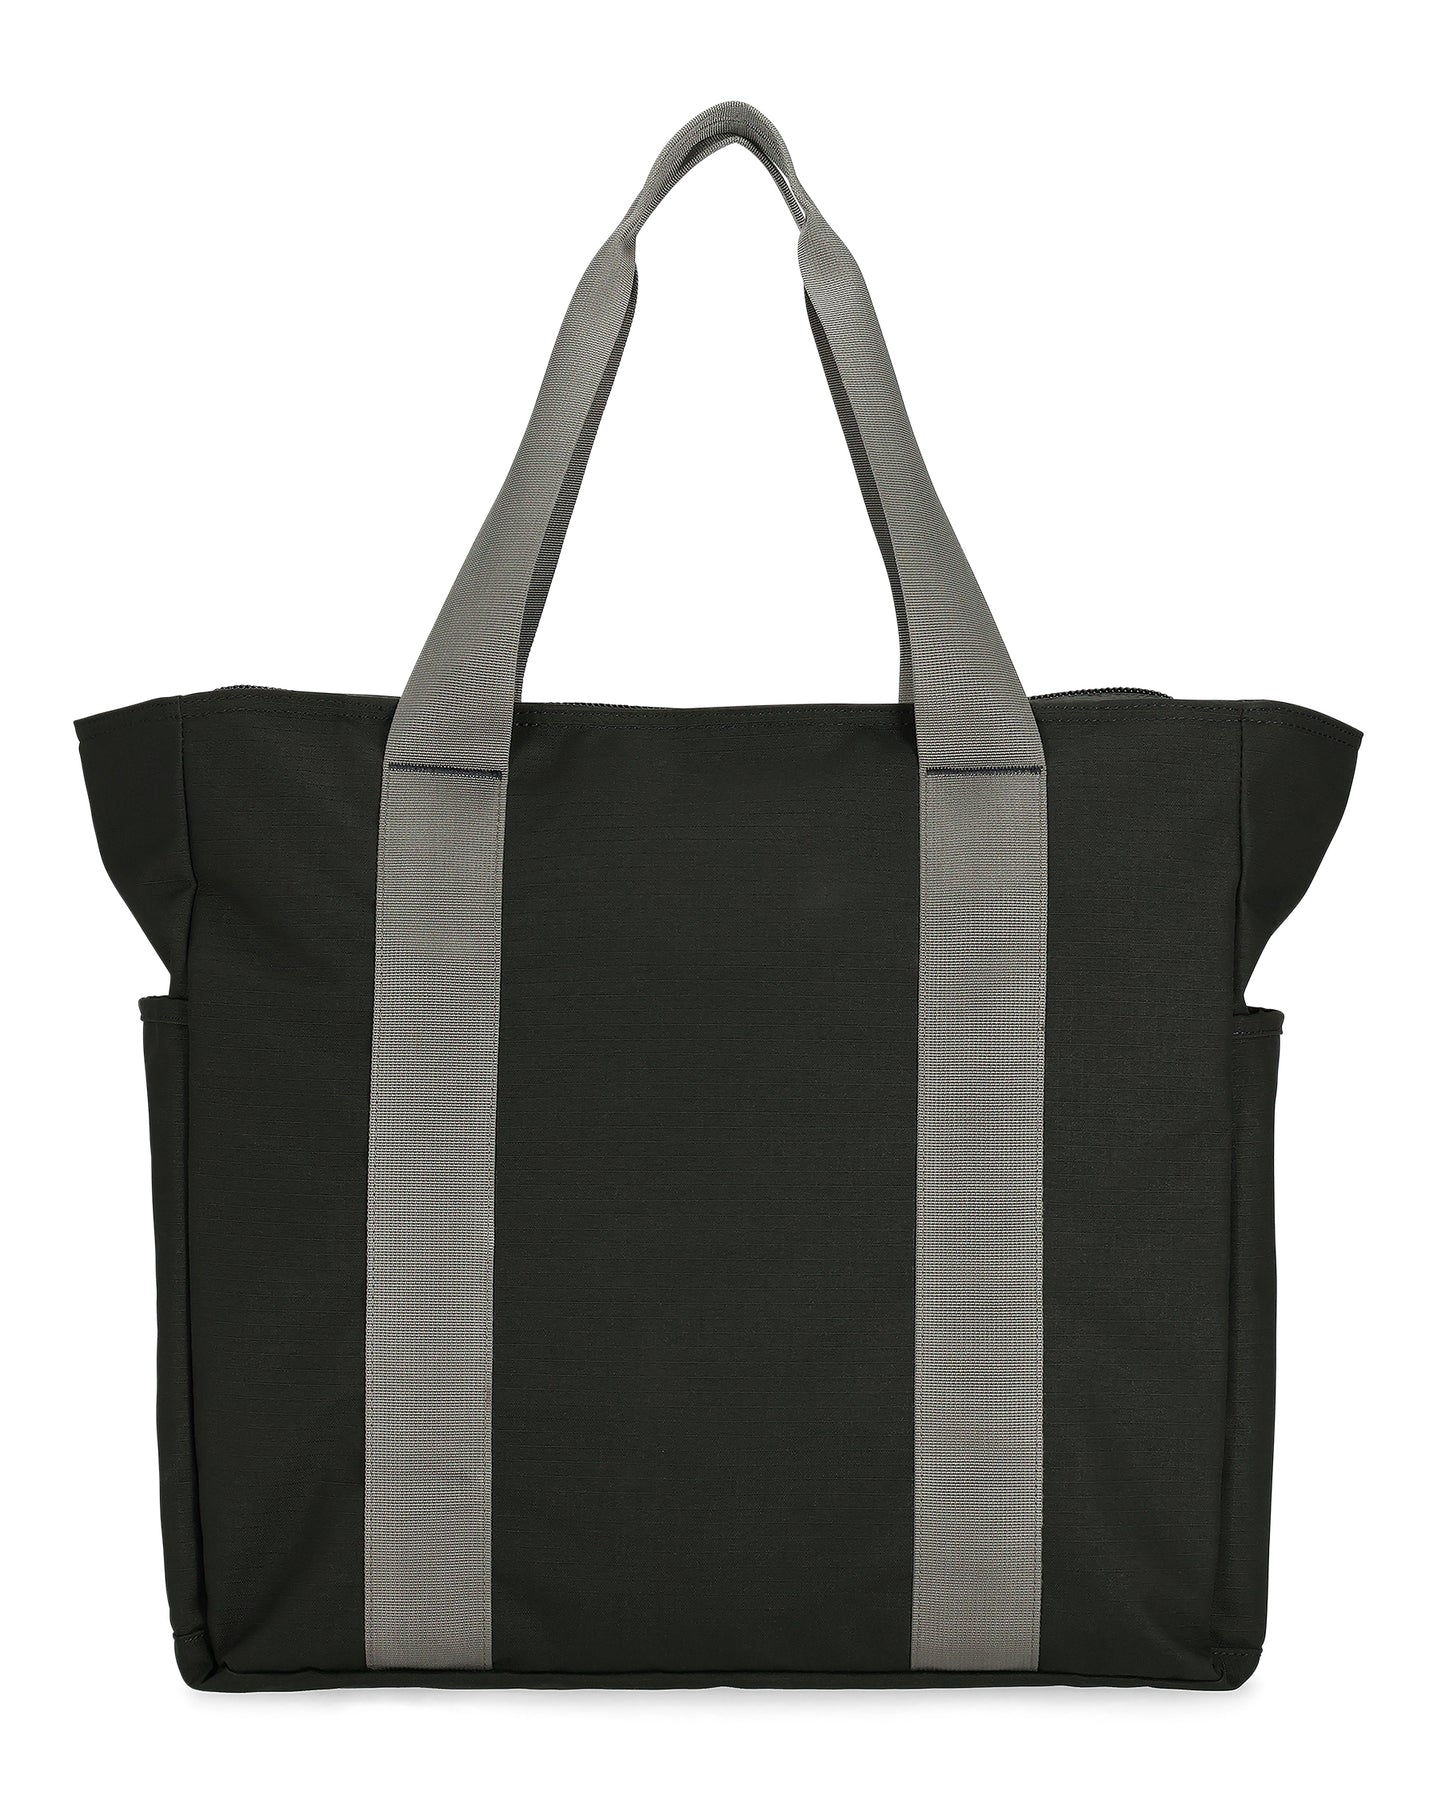 13609-003-gts-travel-tote-mannequin